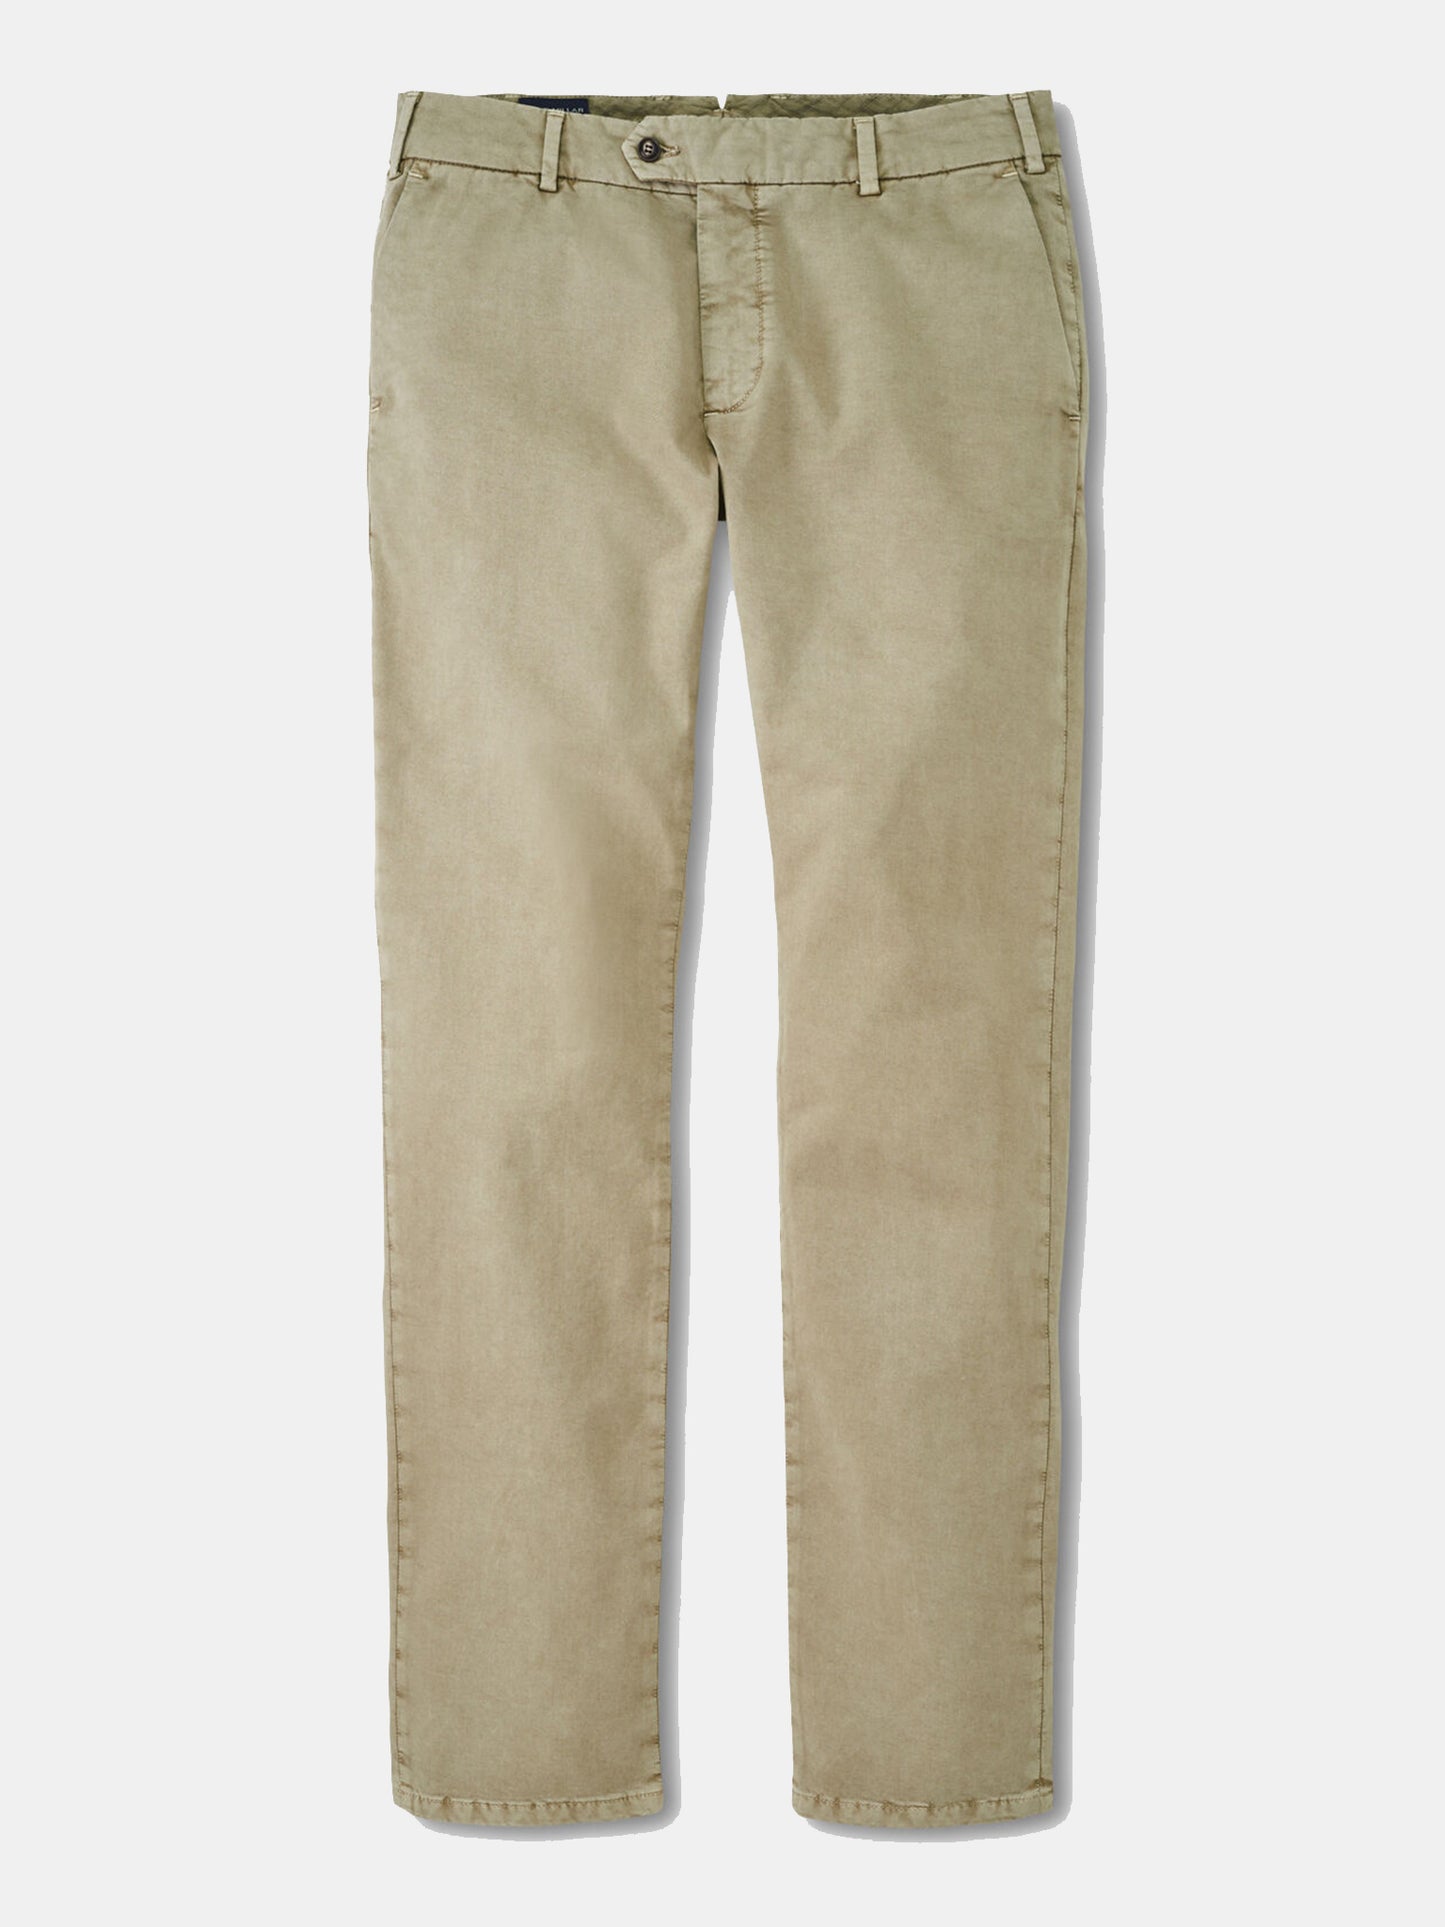 Peter Millar Collection Men's Concorde Garment Dyed Flat-Front Trouser